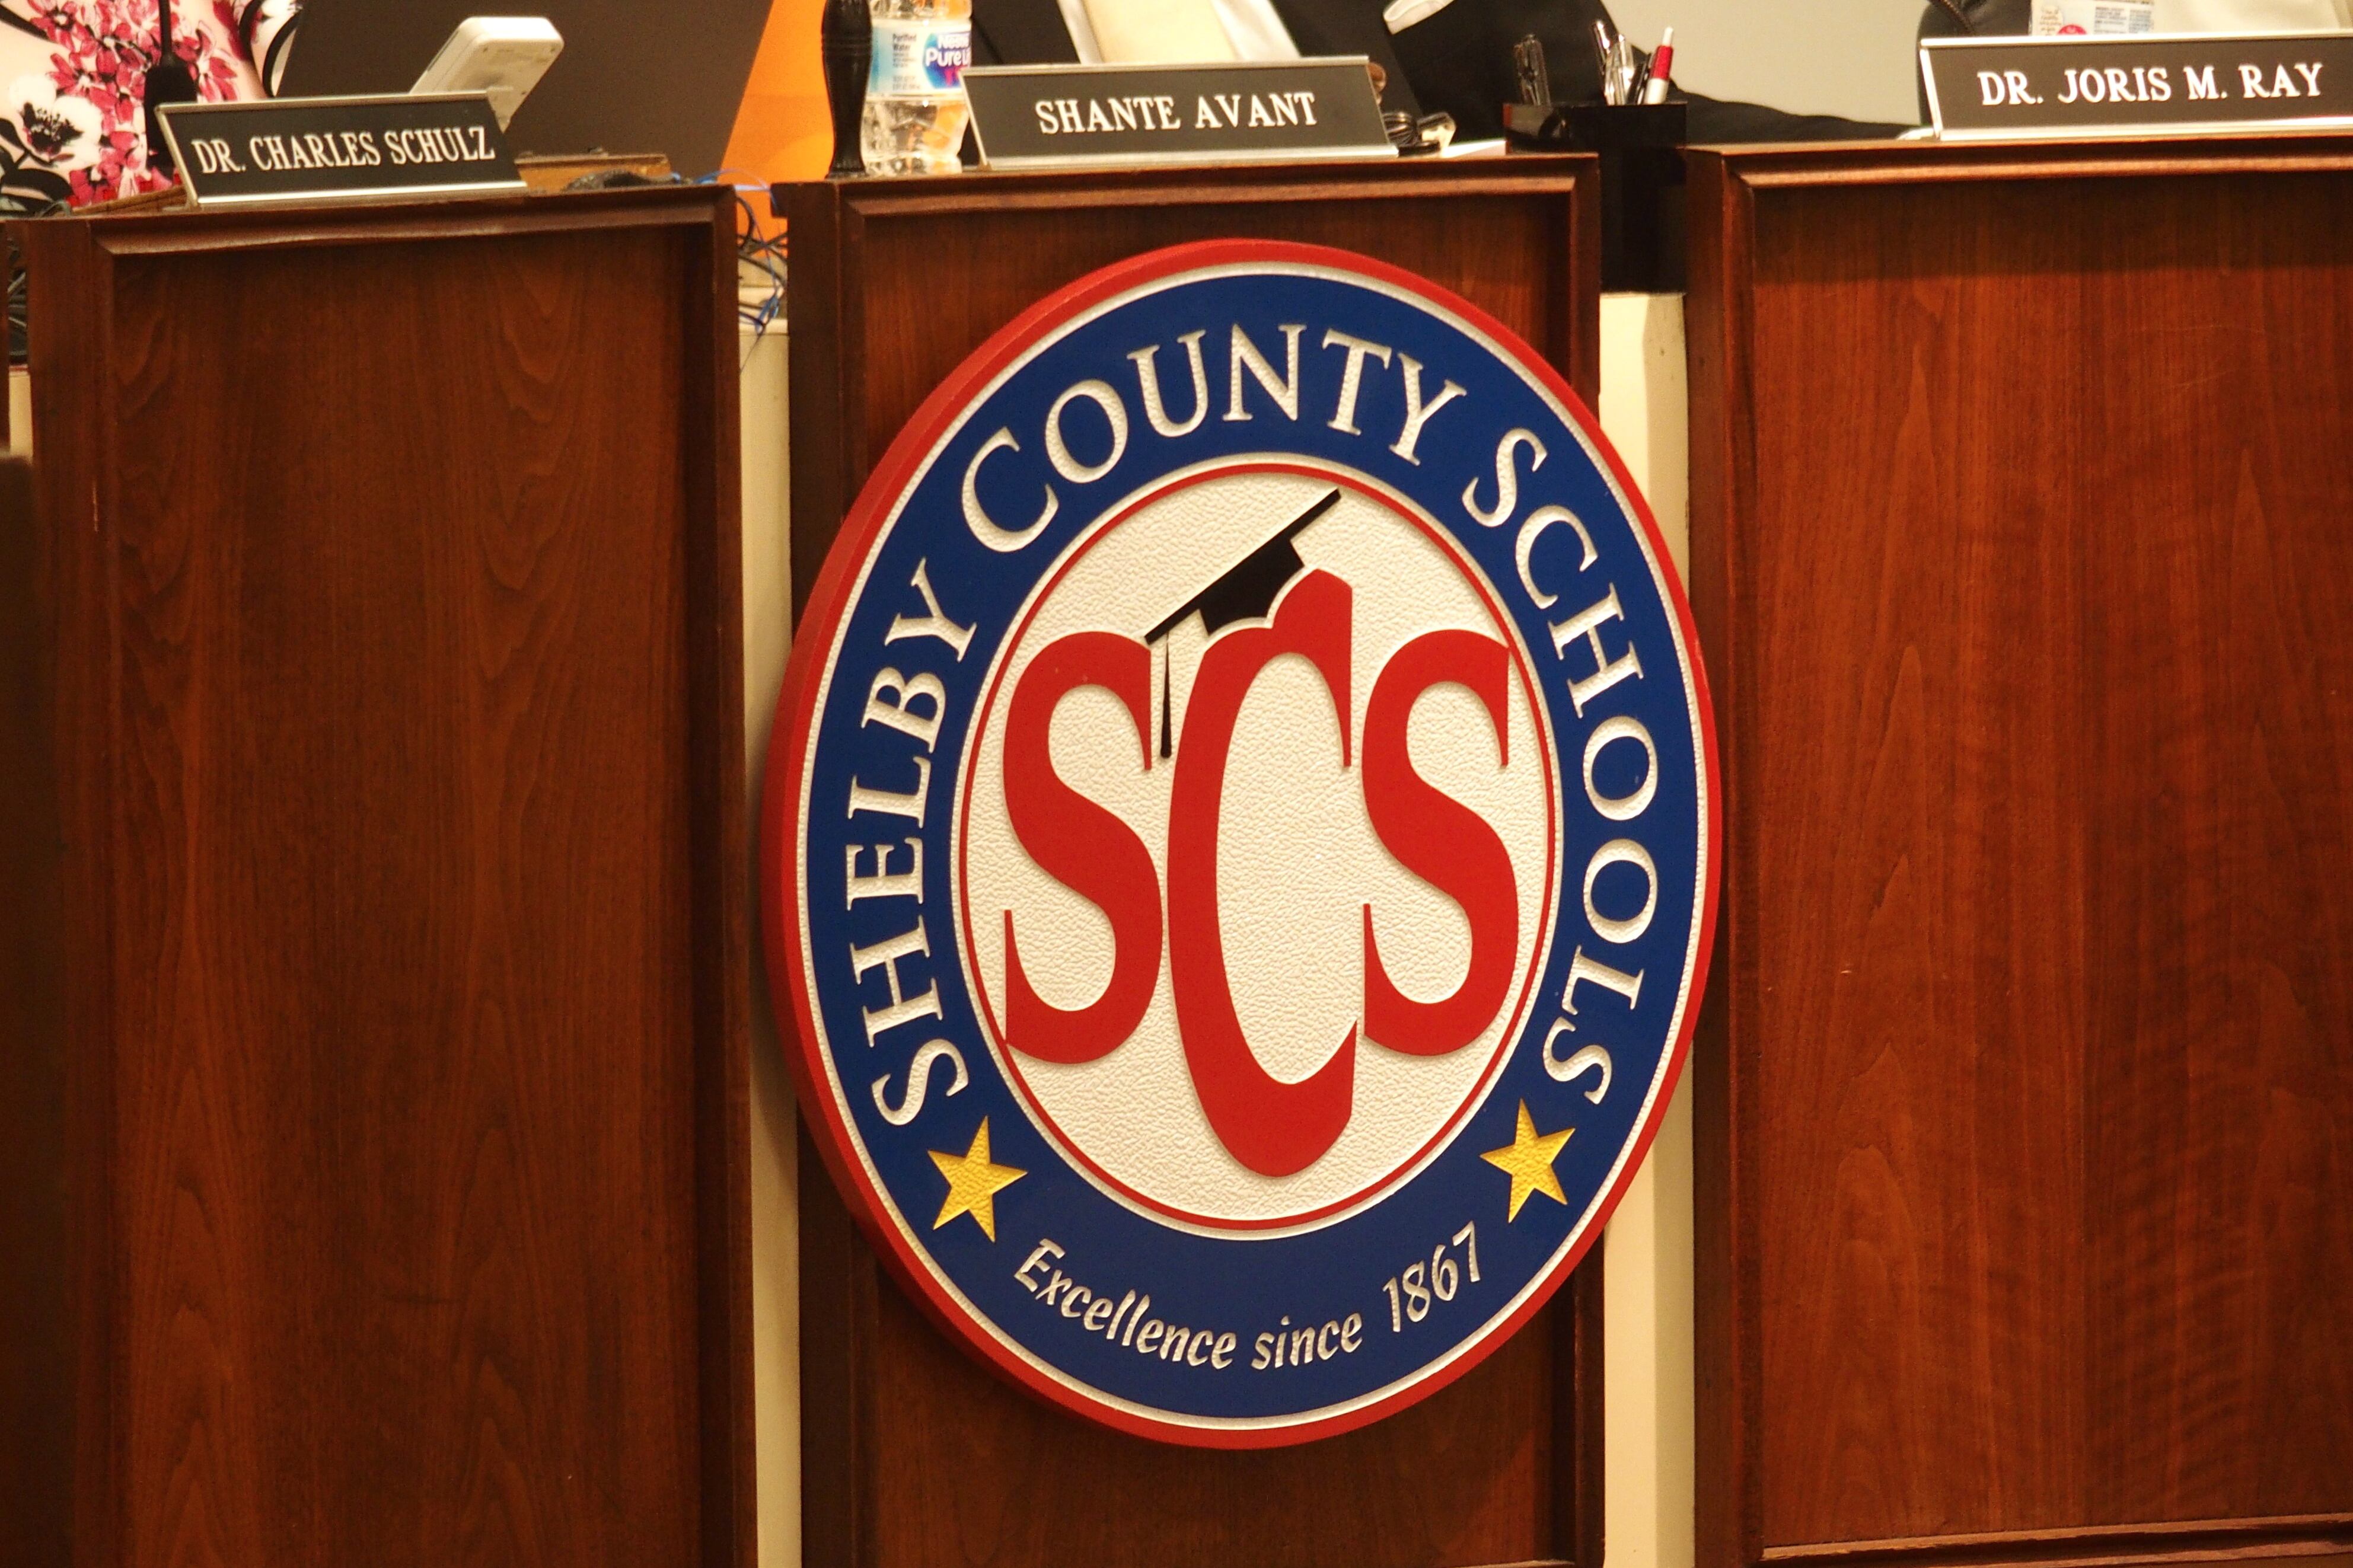 Shelby County Schools logo, SCS surrounded by a white circle, enclosed by a blue circle reading “Shelby County Schools.”